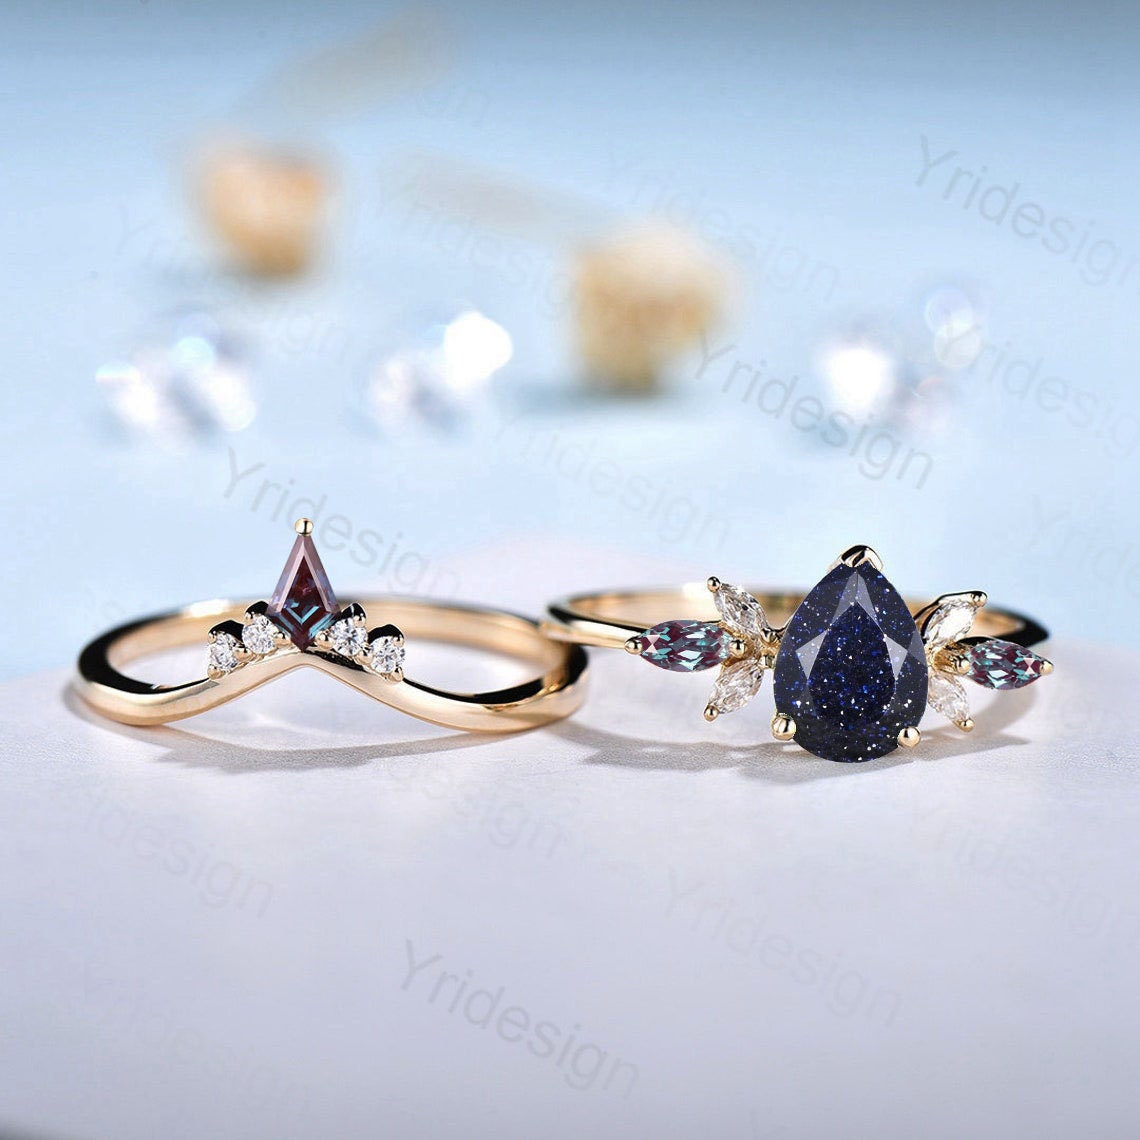 Unique Pear Blue Sandstone Cluster Engagement Rings Galaxy Starry Sky Ring Crystal Alexandrite Ring Unique Handmade Proposal Gifts for Women - PENFINE